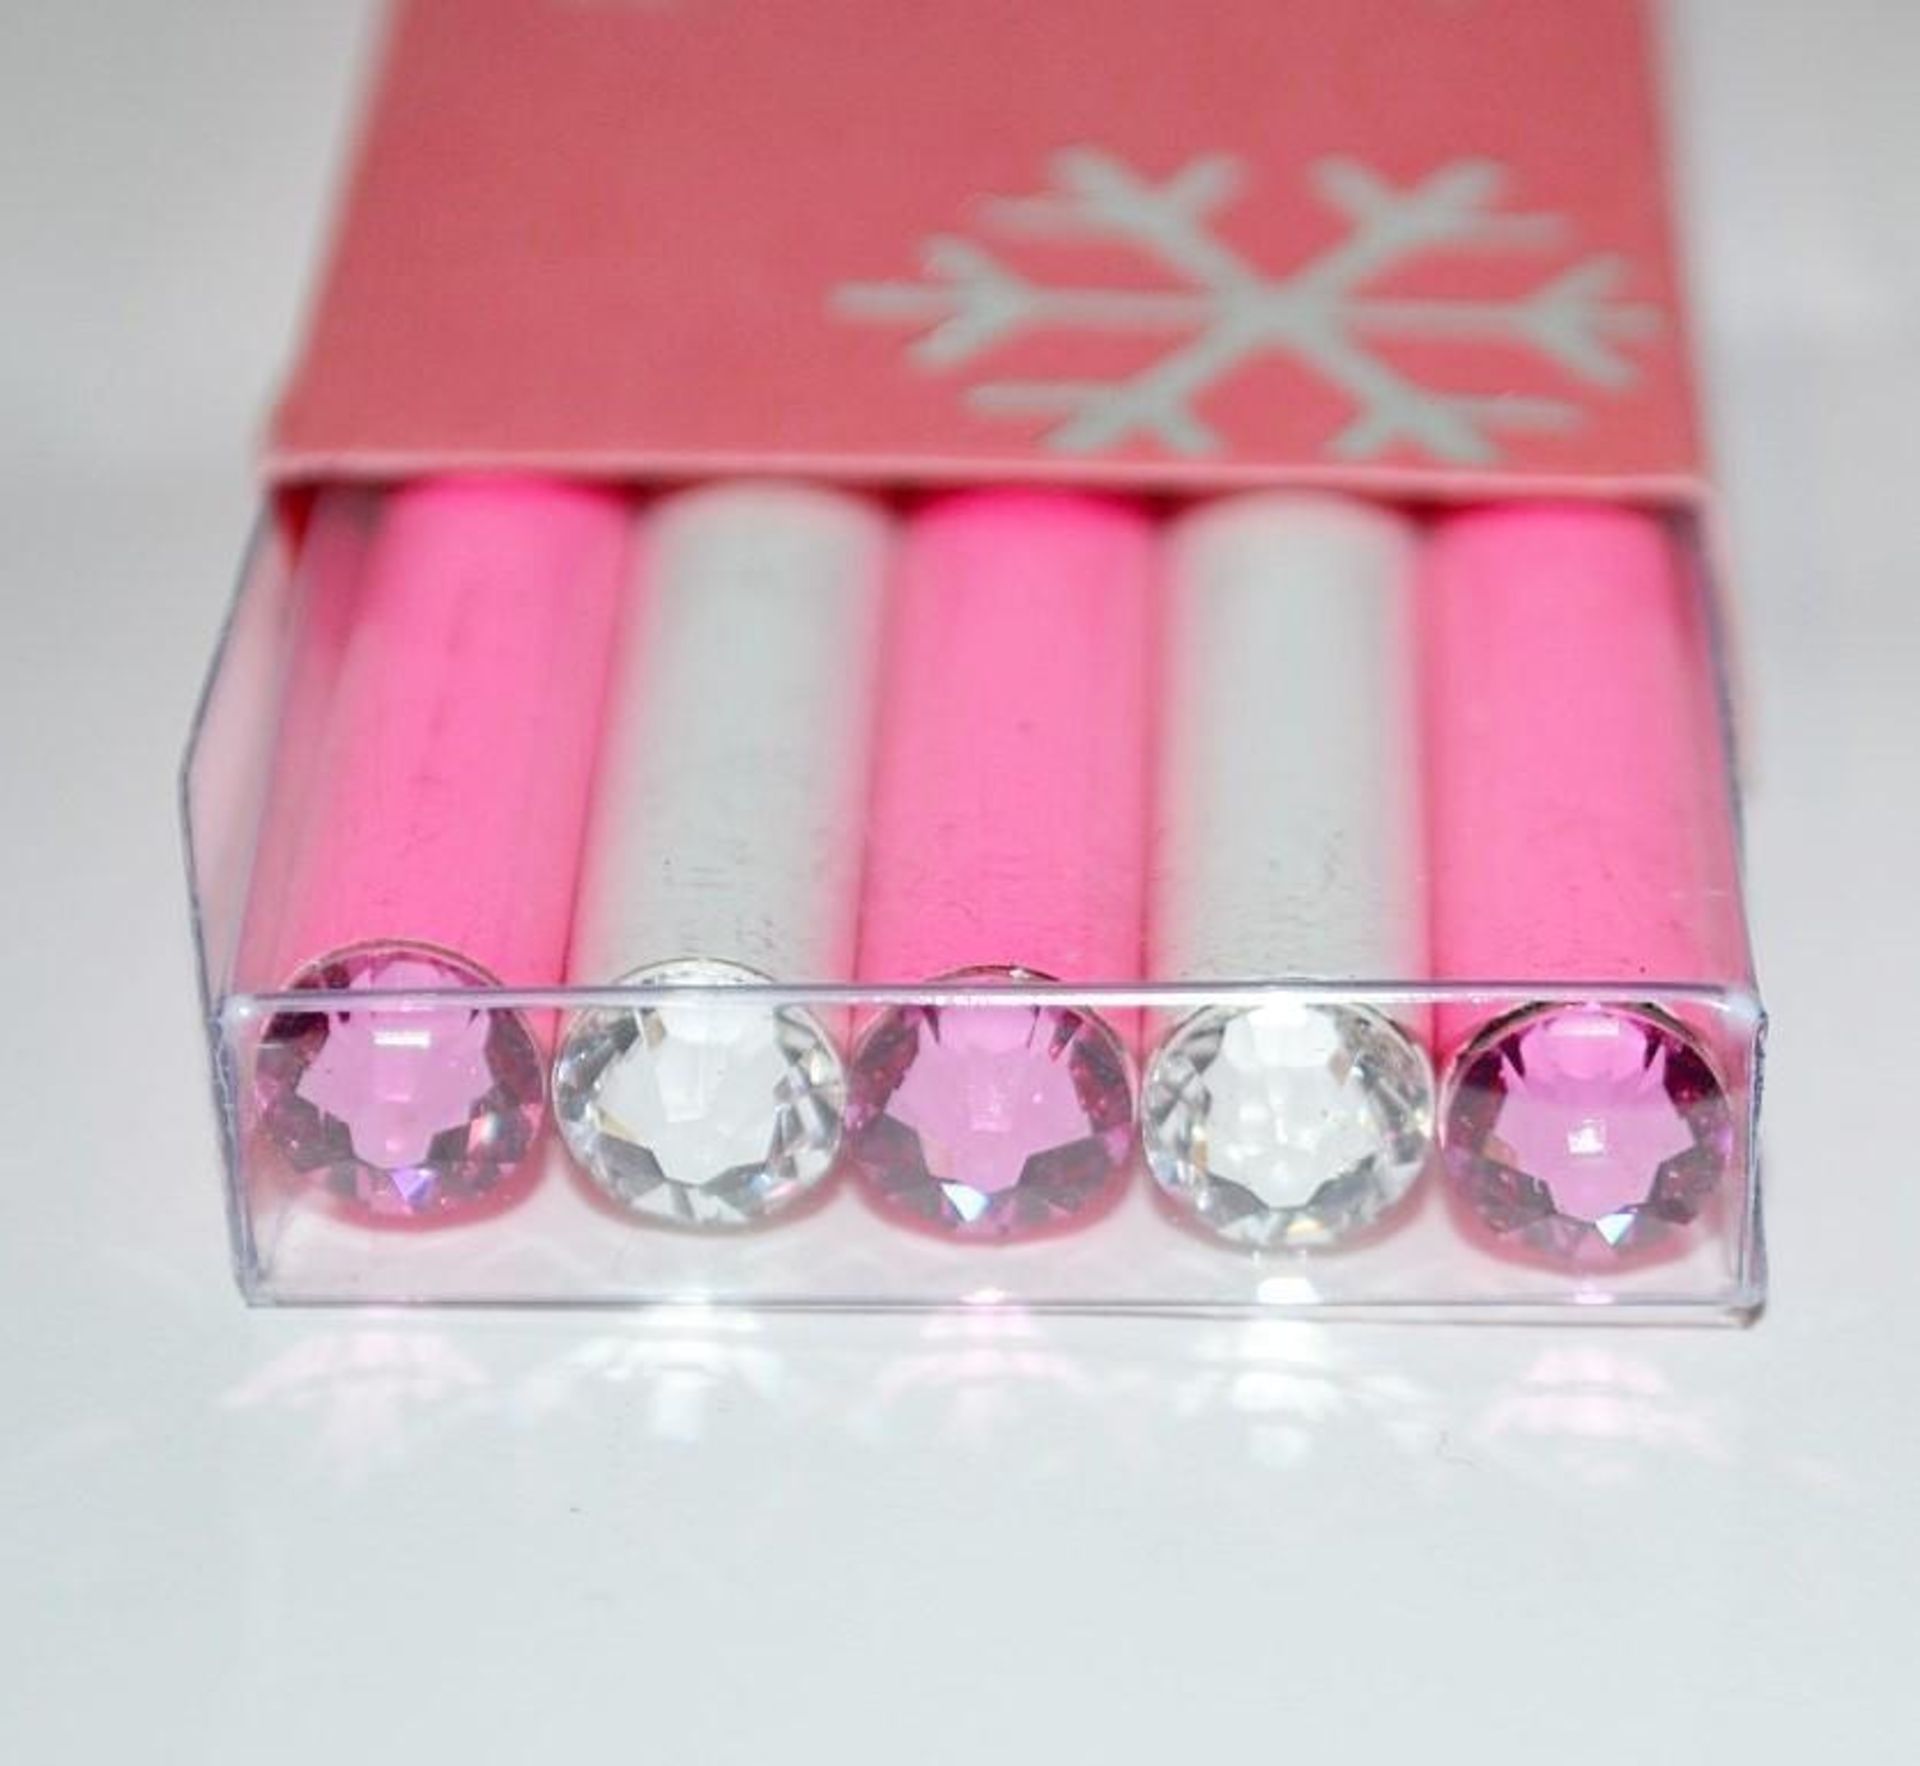 50 x ICE London Christmas Pencil Sets - Colour: PINK - Made With SWAROVSKI® ELEMENTS - Each Set - Image 3 of 4